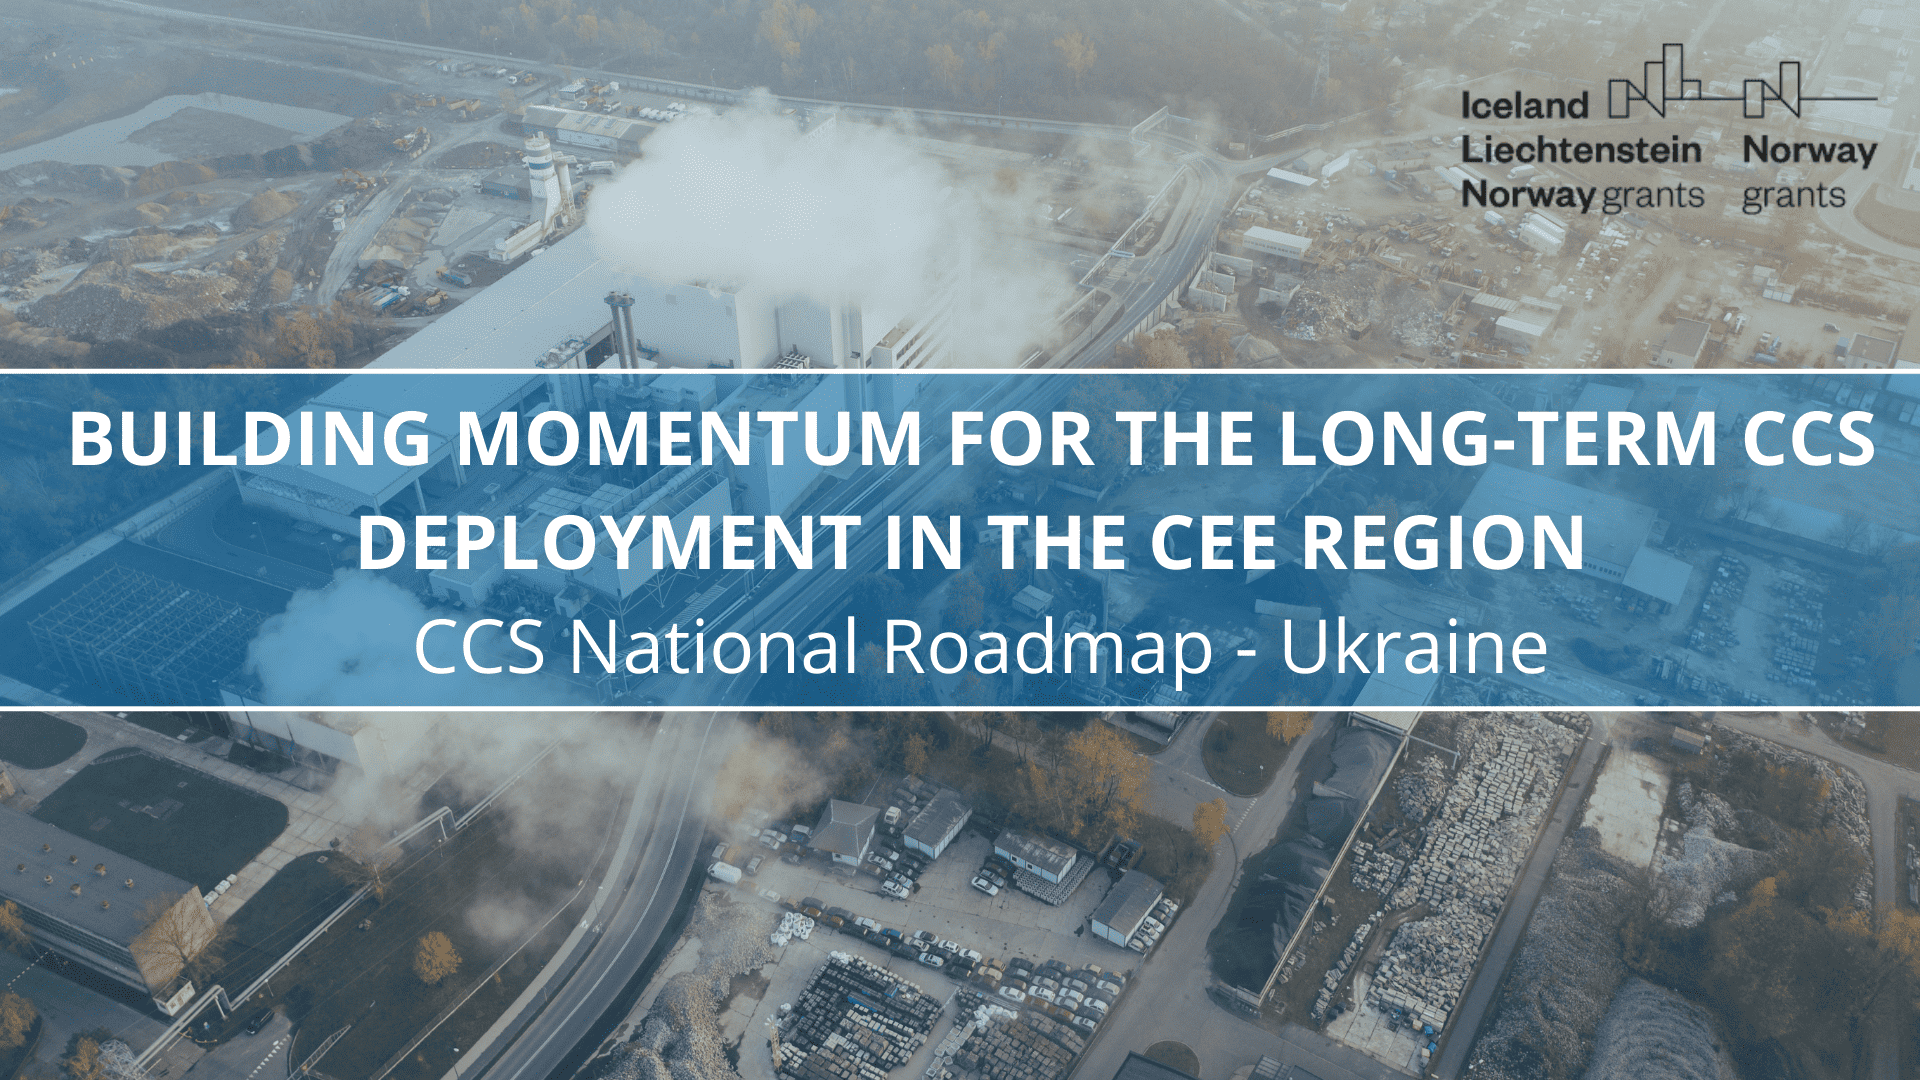 BUILDING MOMENTUM FOR THE LONG-TERM CCS DEPLOYMENT IN THE CEE REGION – CCS National Roadmap – Ukraine